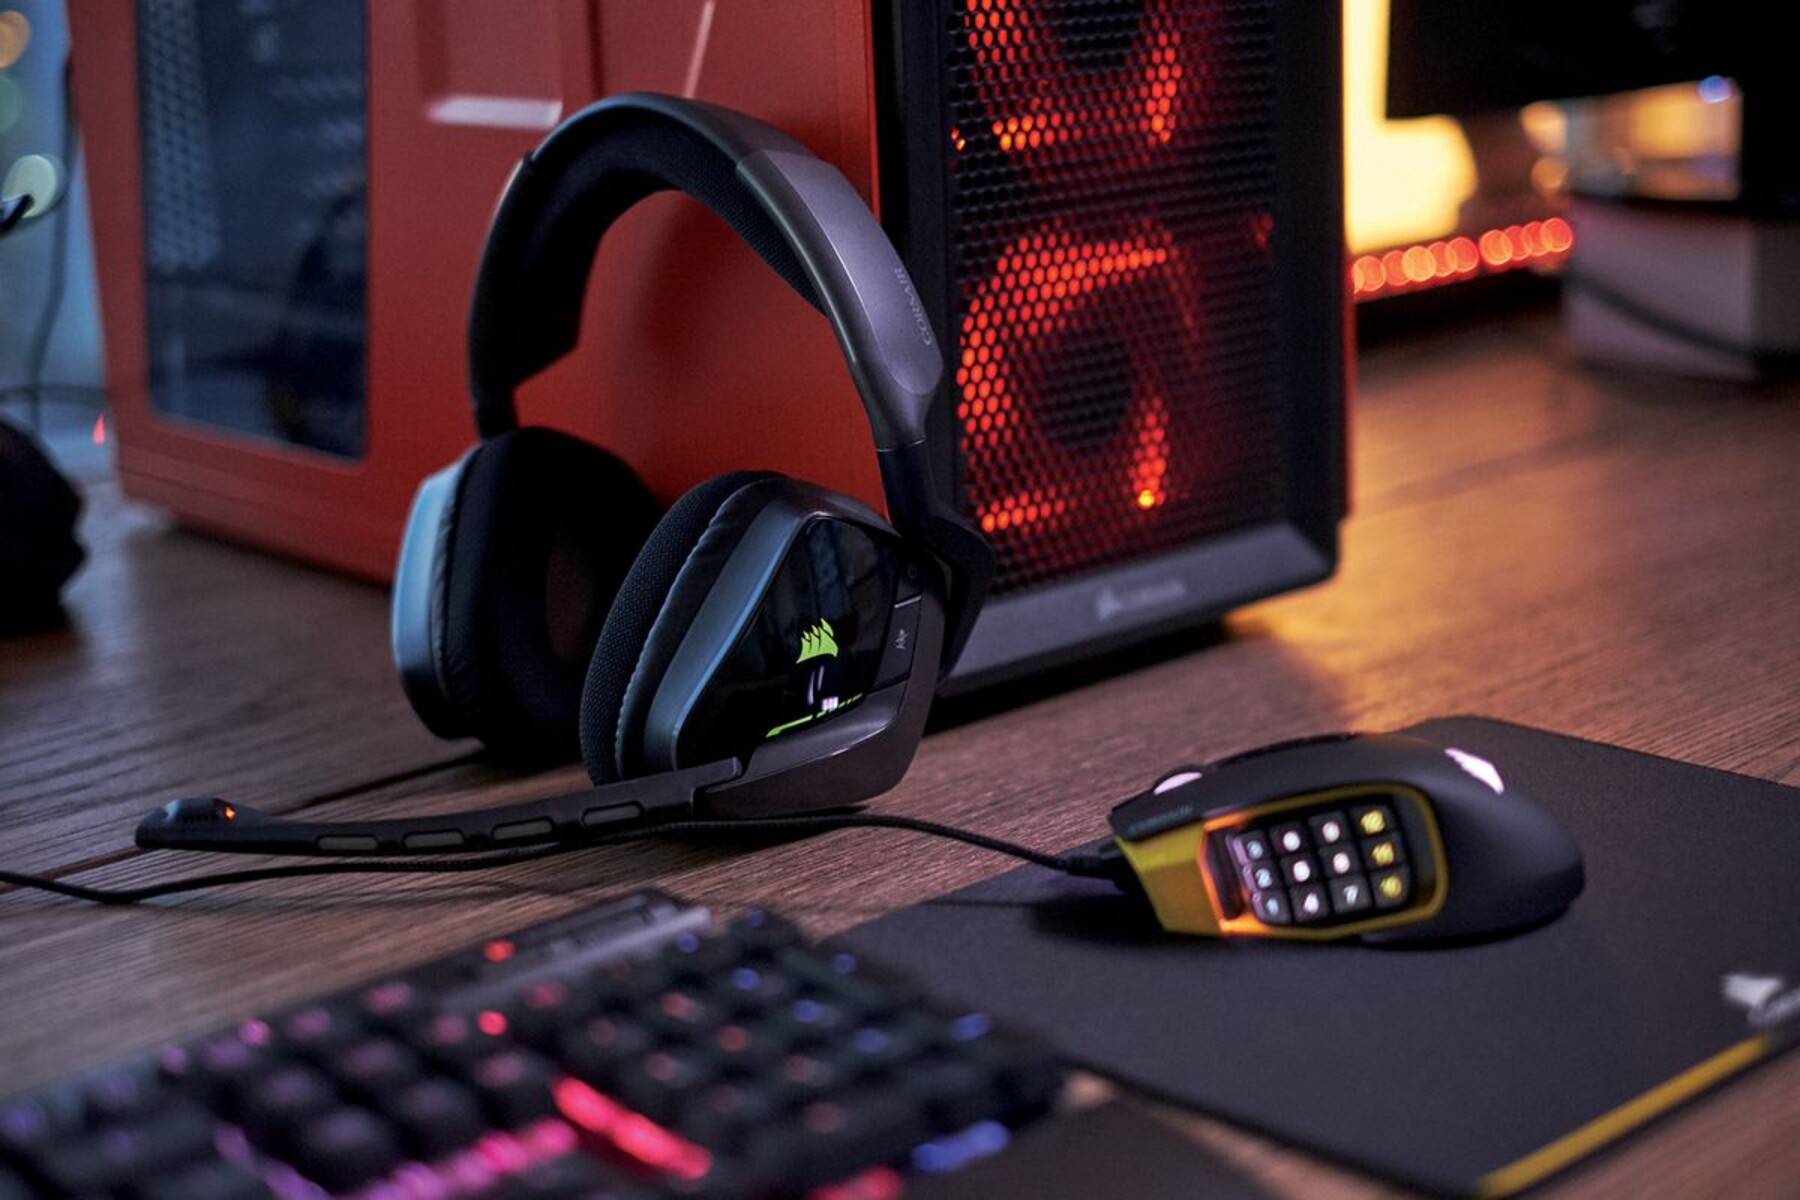 i-hear-a-buzzing-noise-when-in-my-corsair-void-gaming-headset